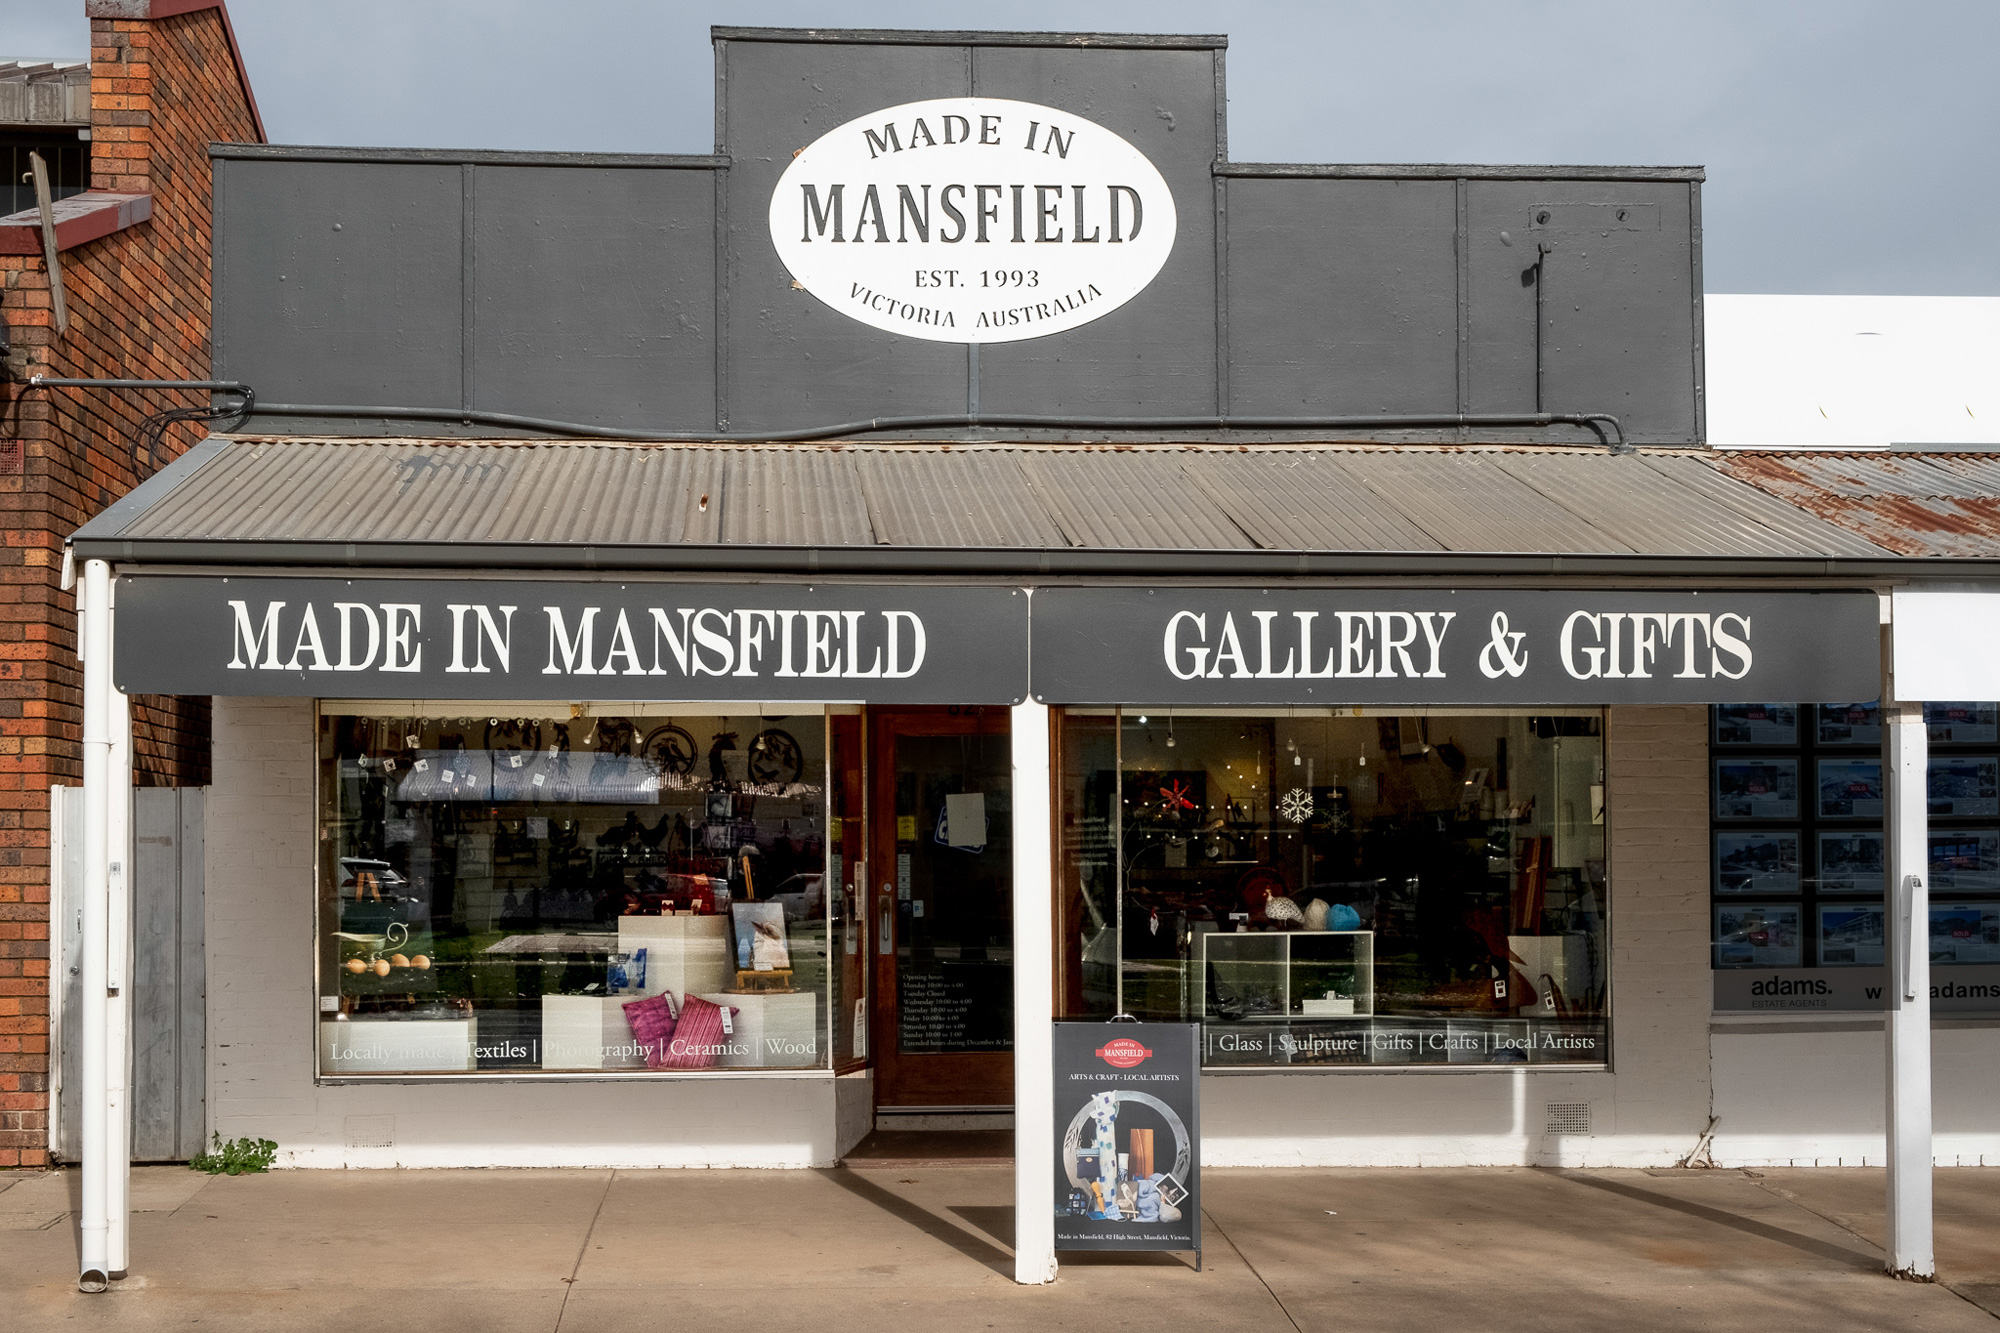 The Made in Mansfield shop on Main Street, Mansfield Victoria.